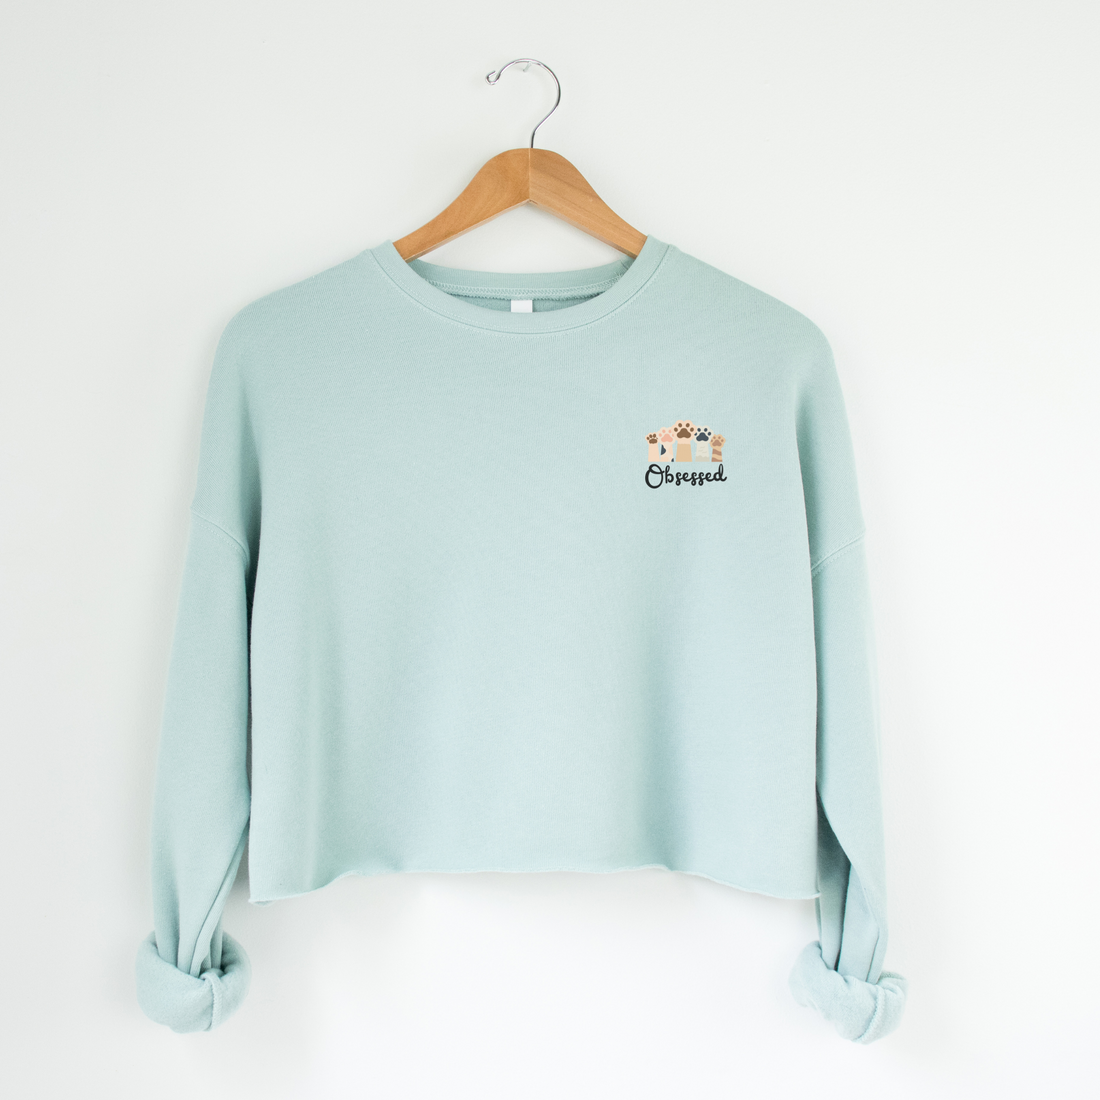 Explorer Cropped Sweatshirt - Obsessed With Paws